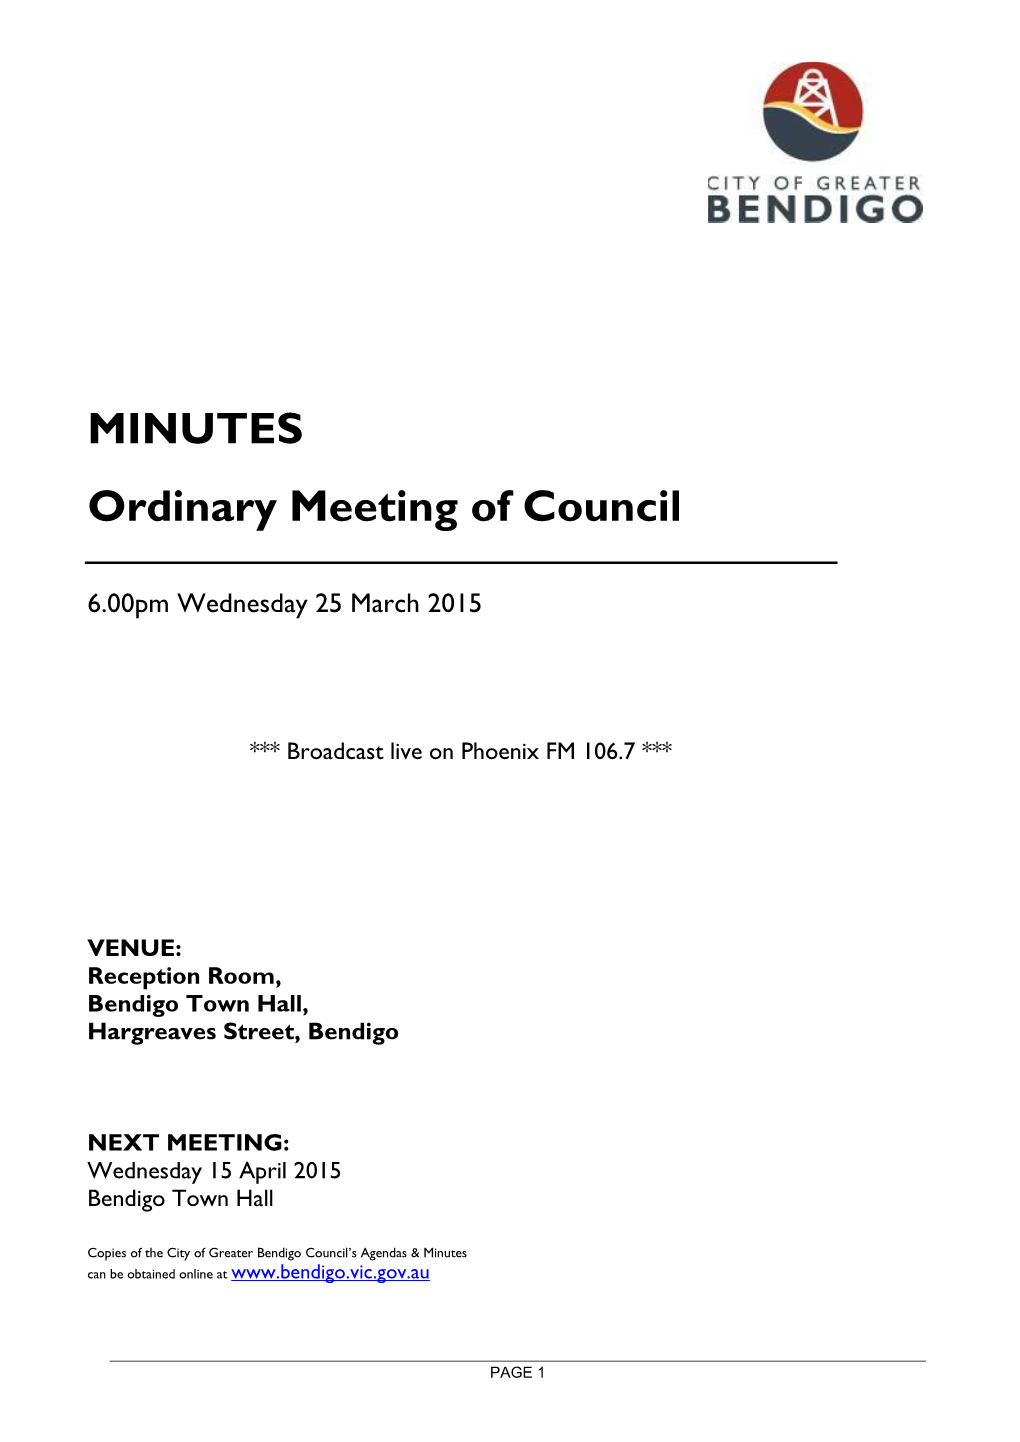 MINUTES Ordinary Meeting of Council